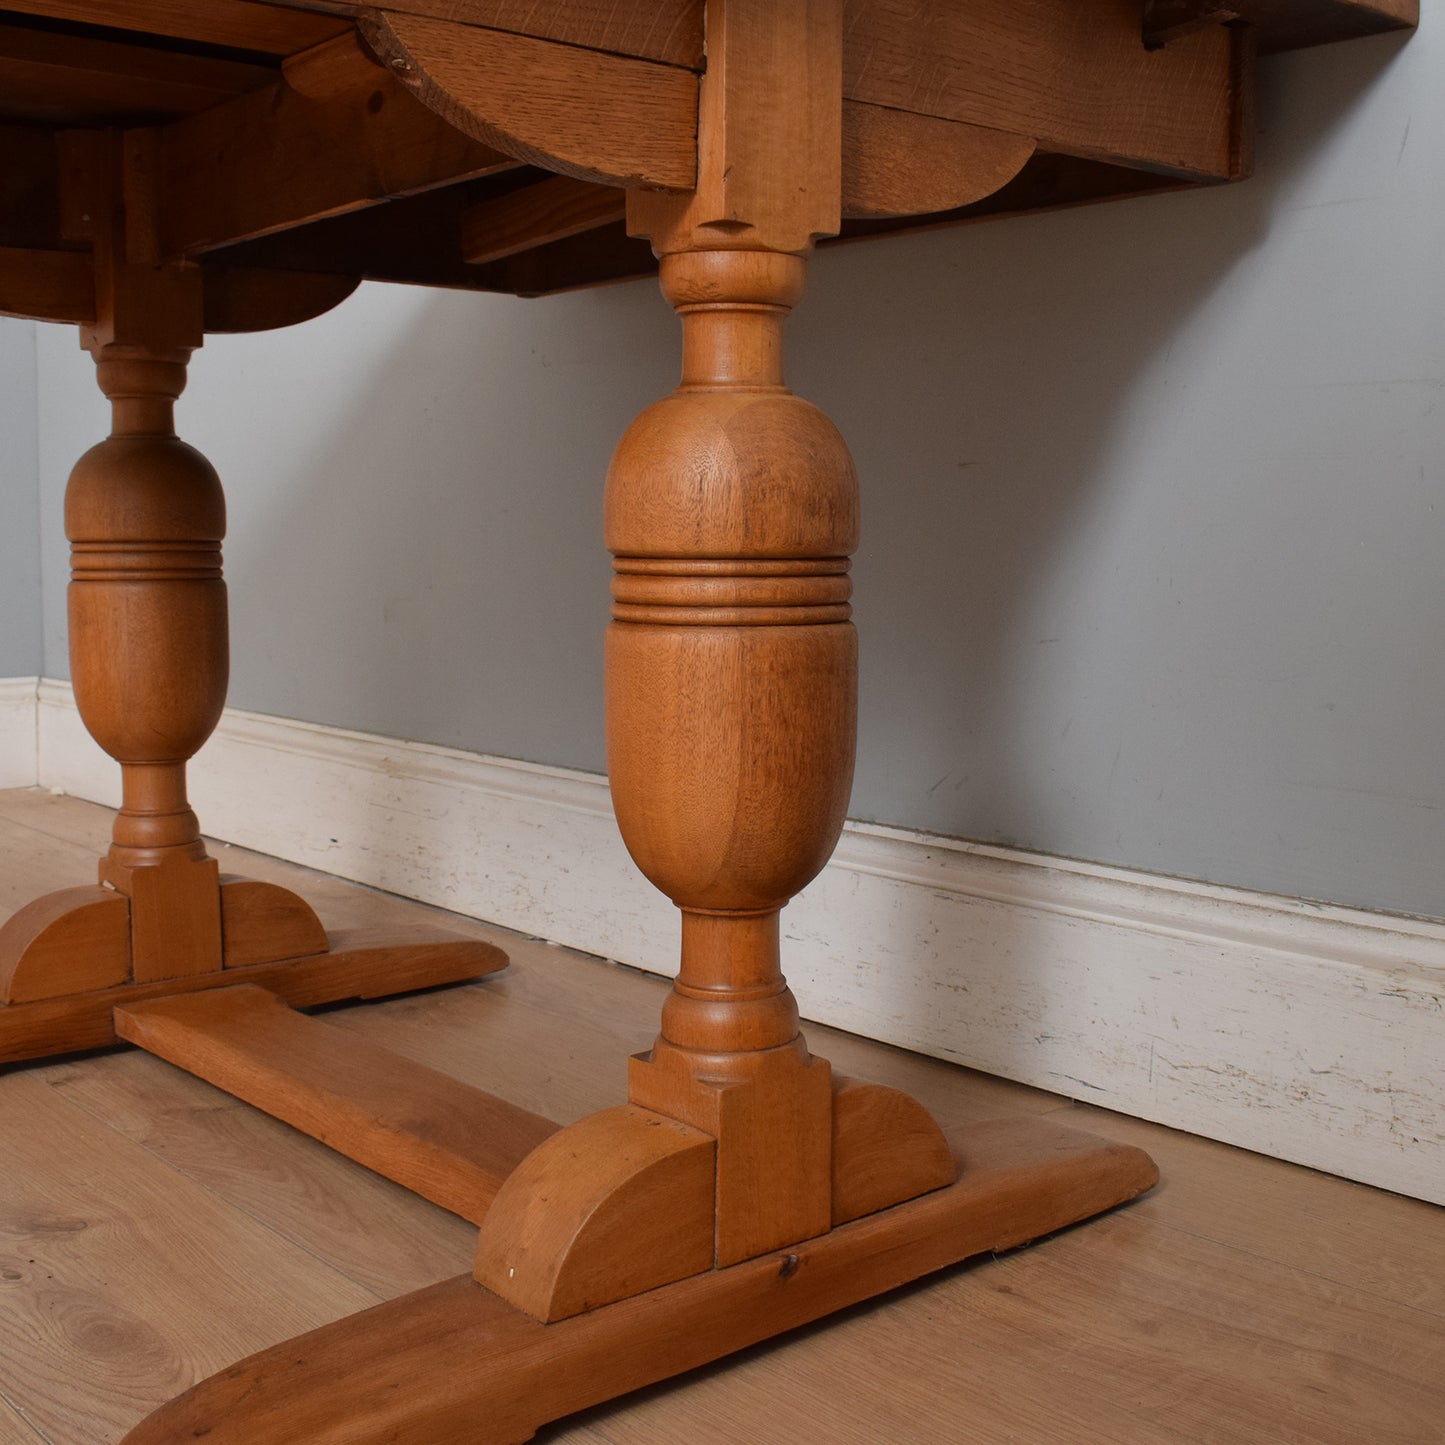 Oak Draw-Leaf Table and Four Chairs